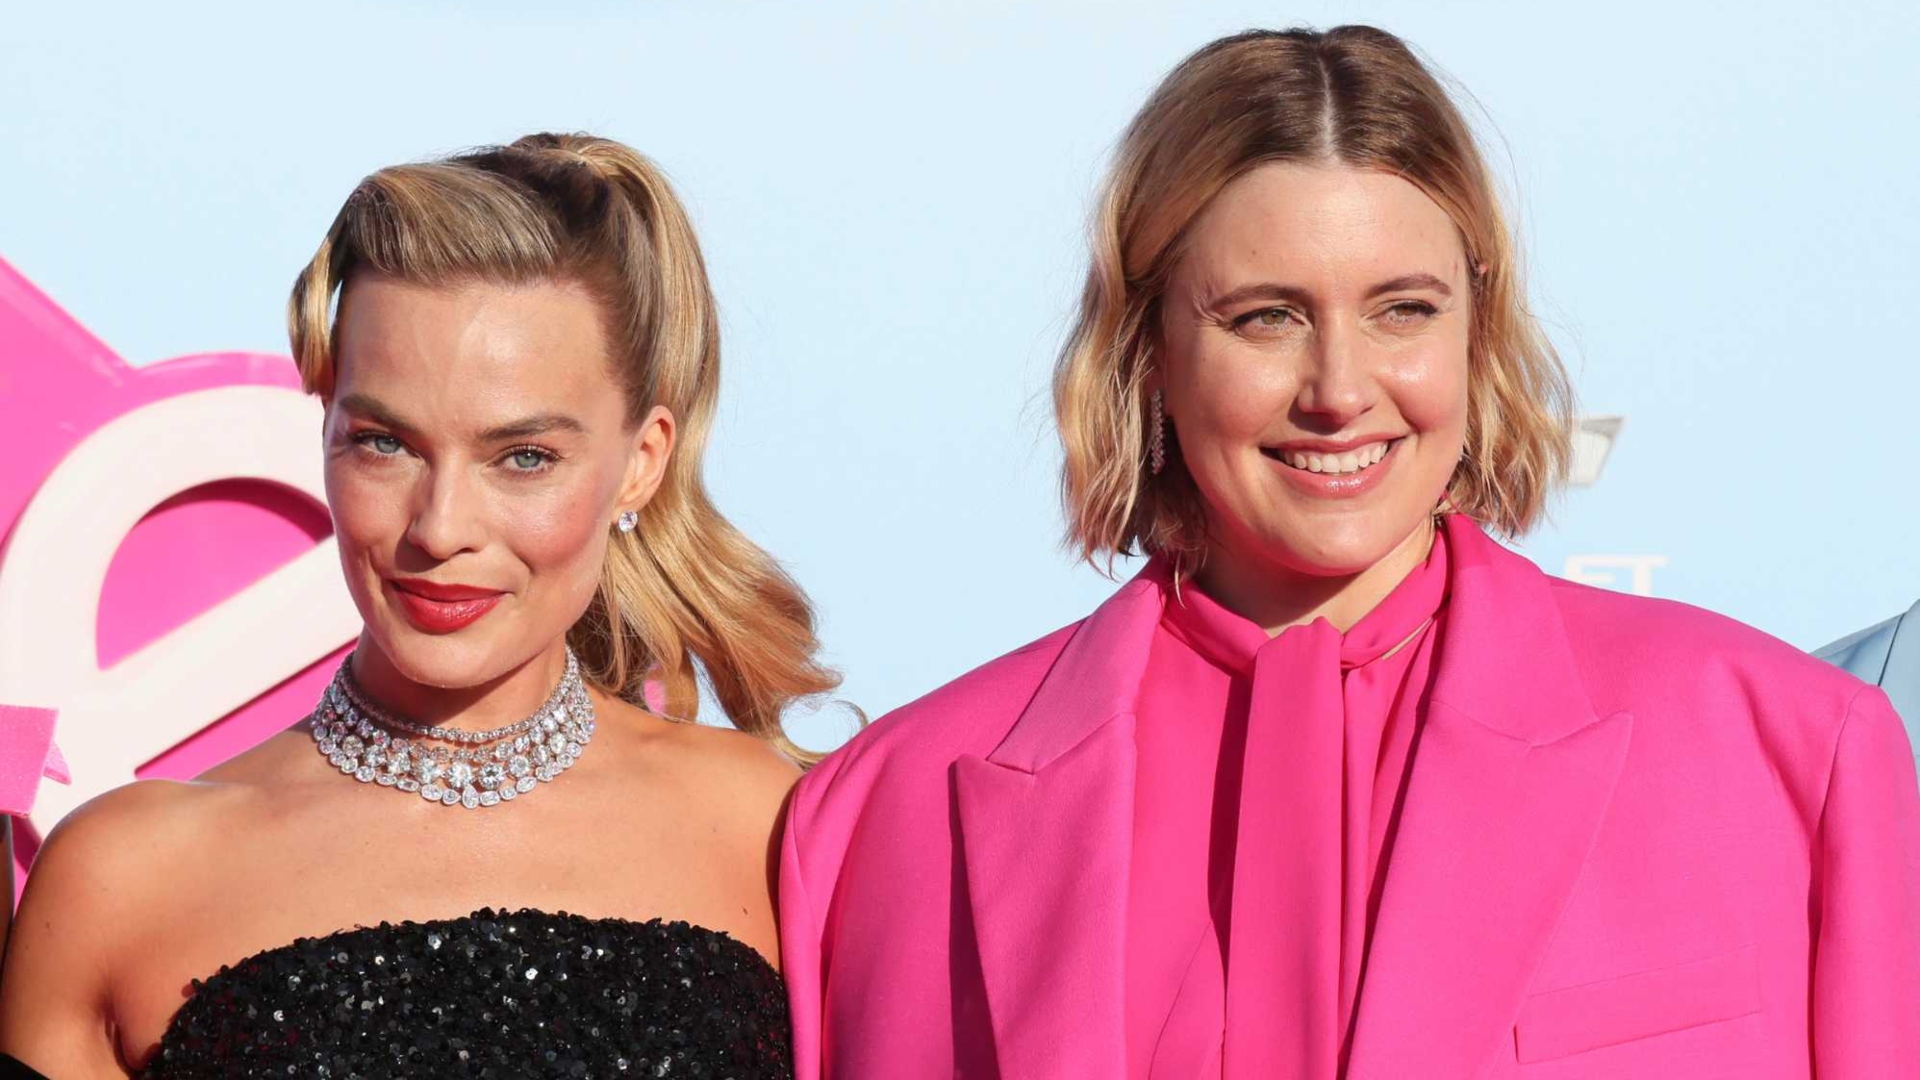 Margot Robbie and Greta Gerwig got nods in producing and co-writing best picture category, respectively